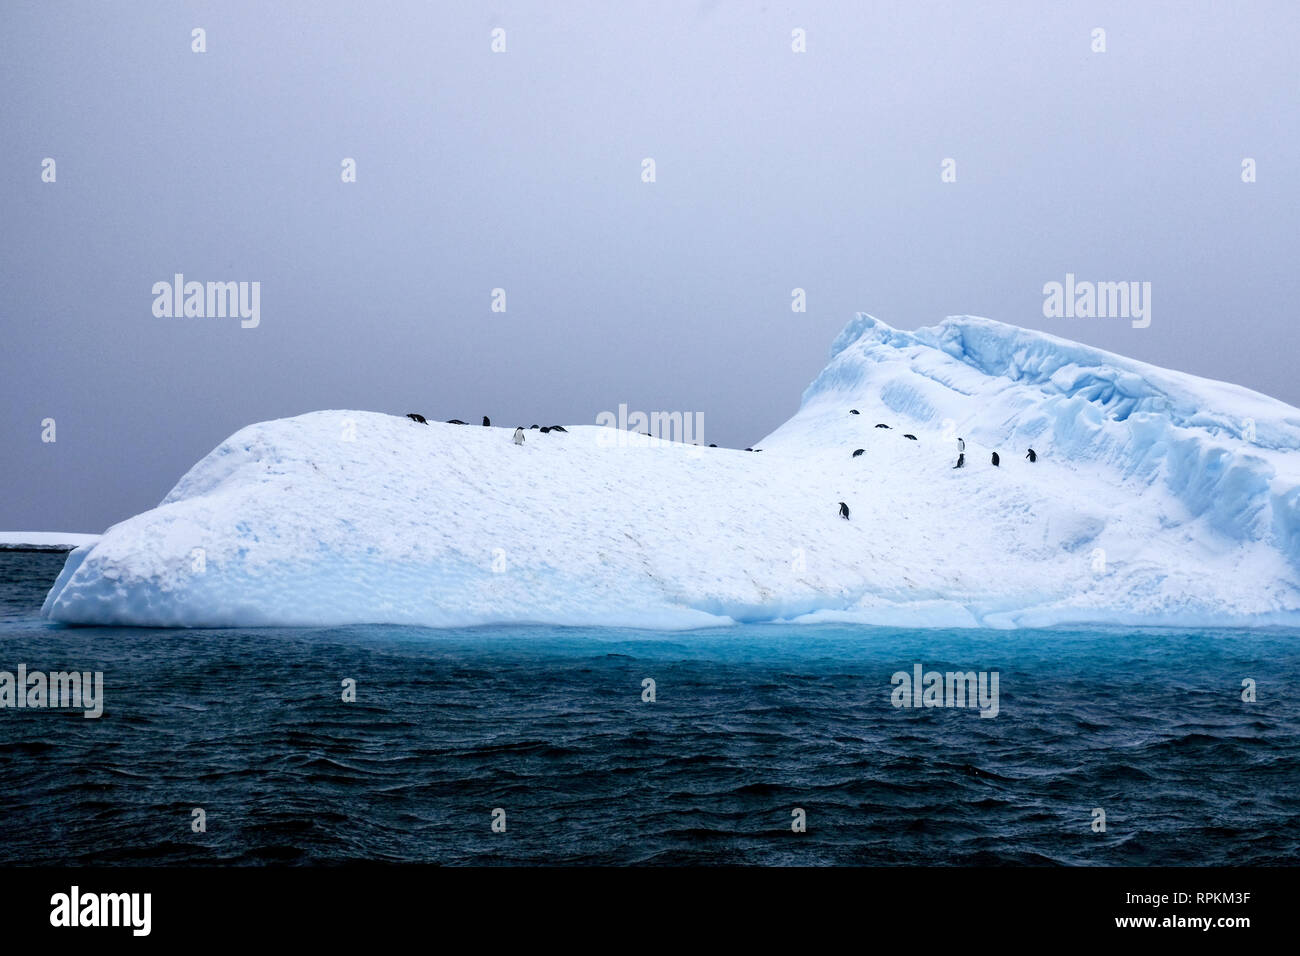 Snow, ice, glaciers, ocean water, clouds and penguins - a typical scene for Antarctica tourism - on a cold overcast day Stock Photo